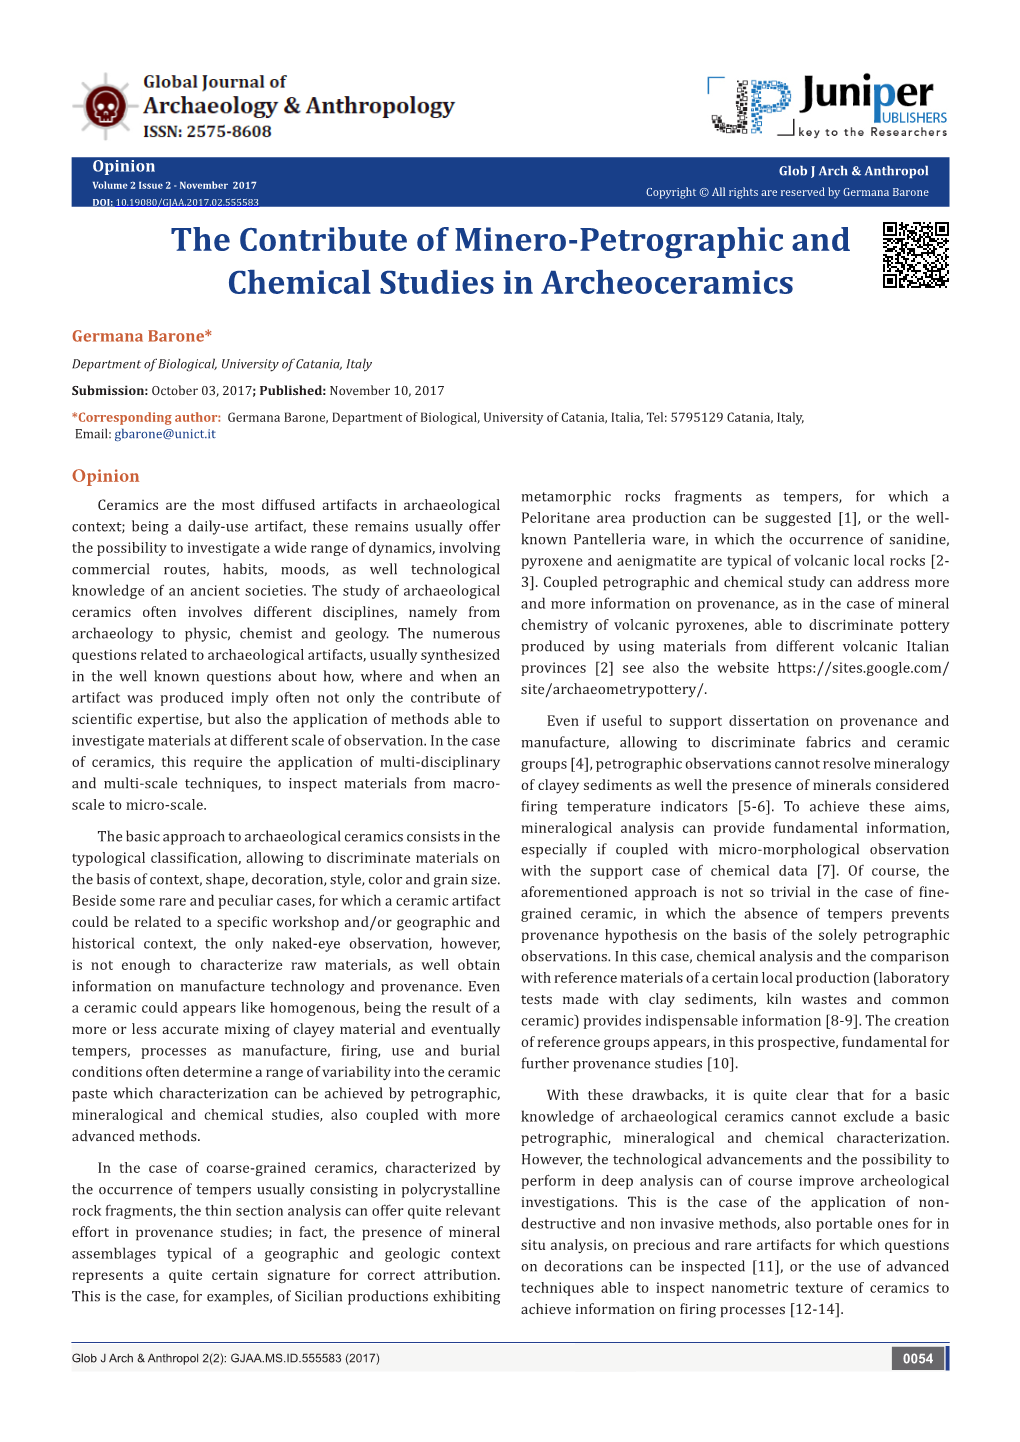 The Contribute of Minero-Petrographic and Chemical Studies in Archeoceramics